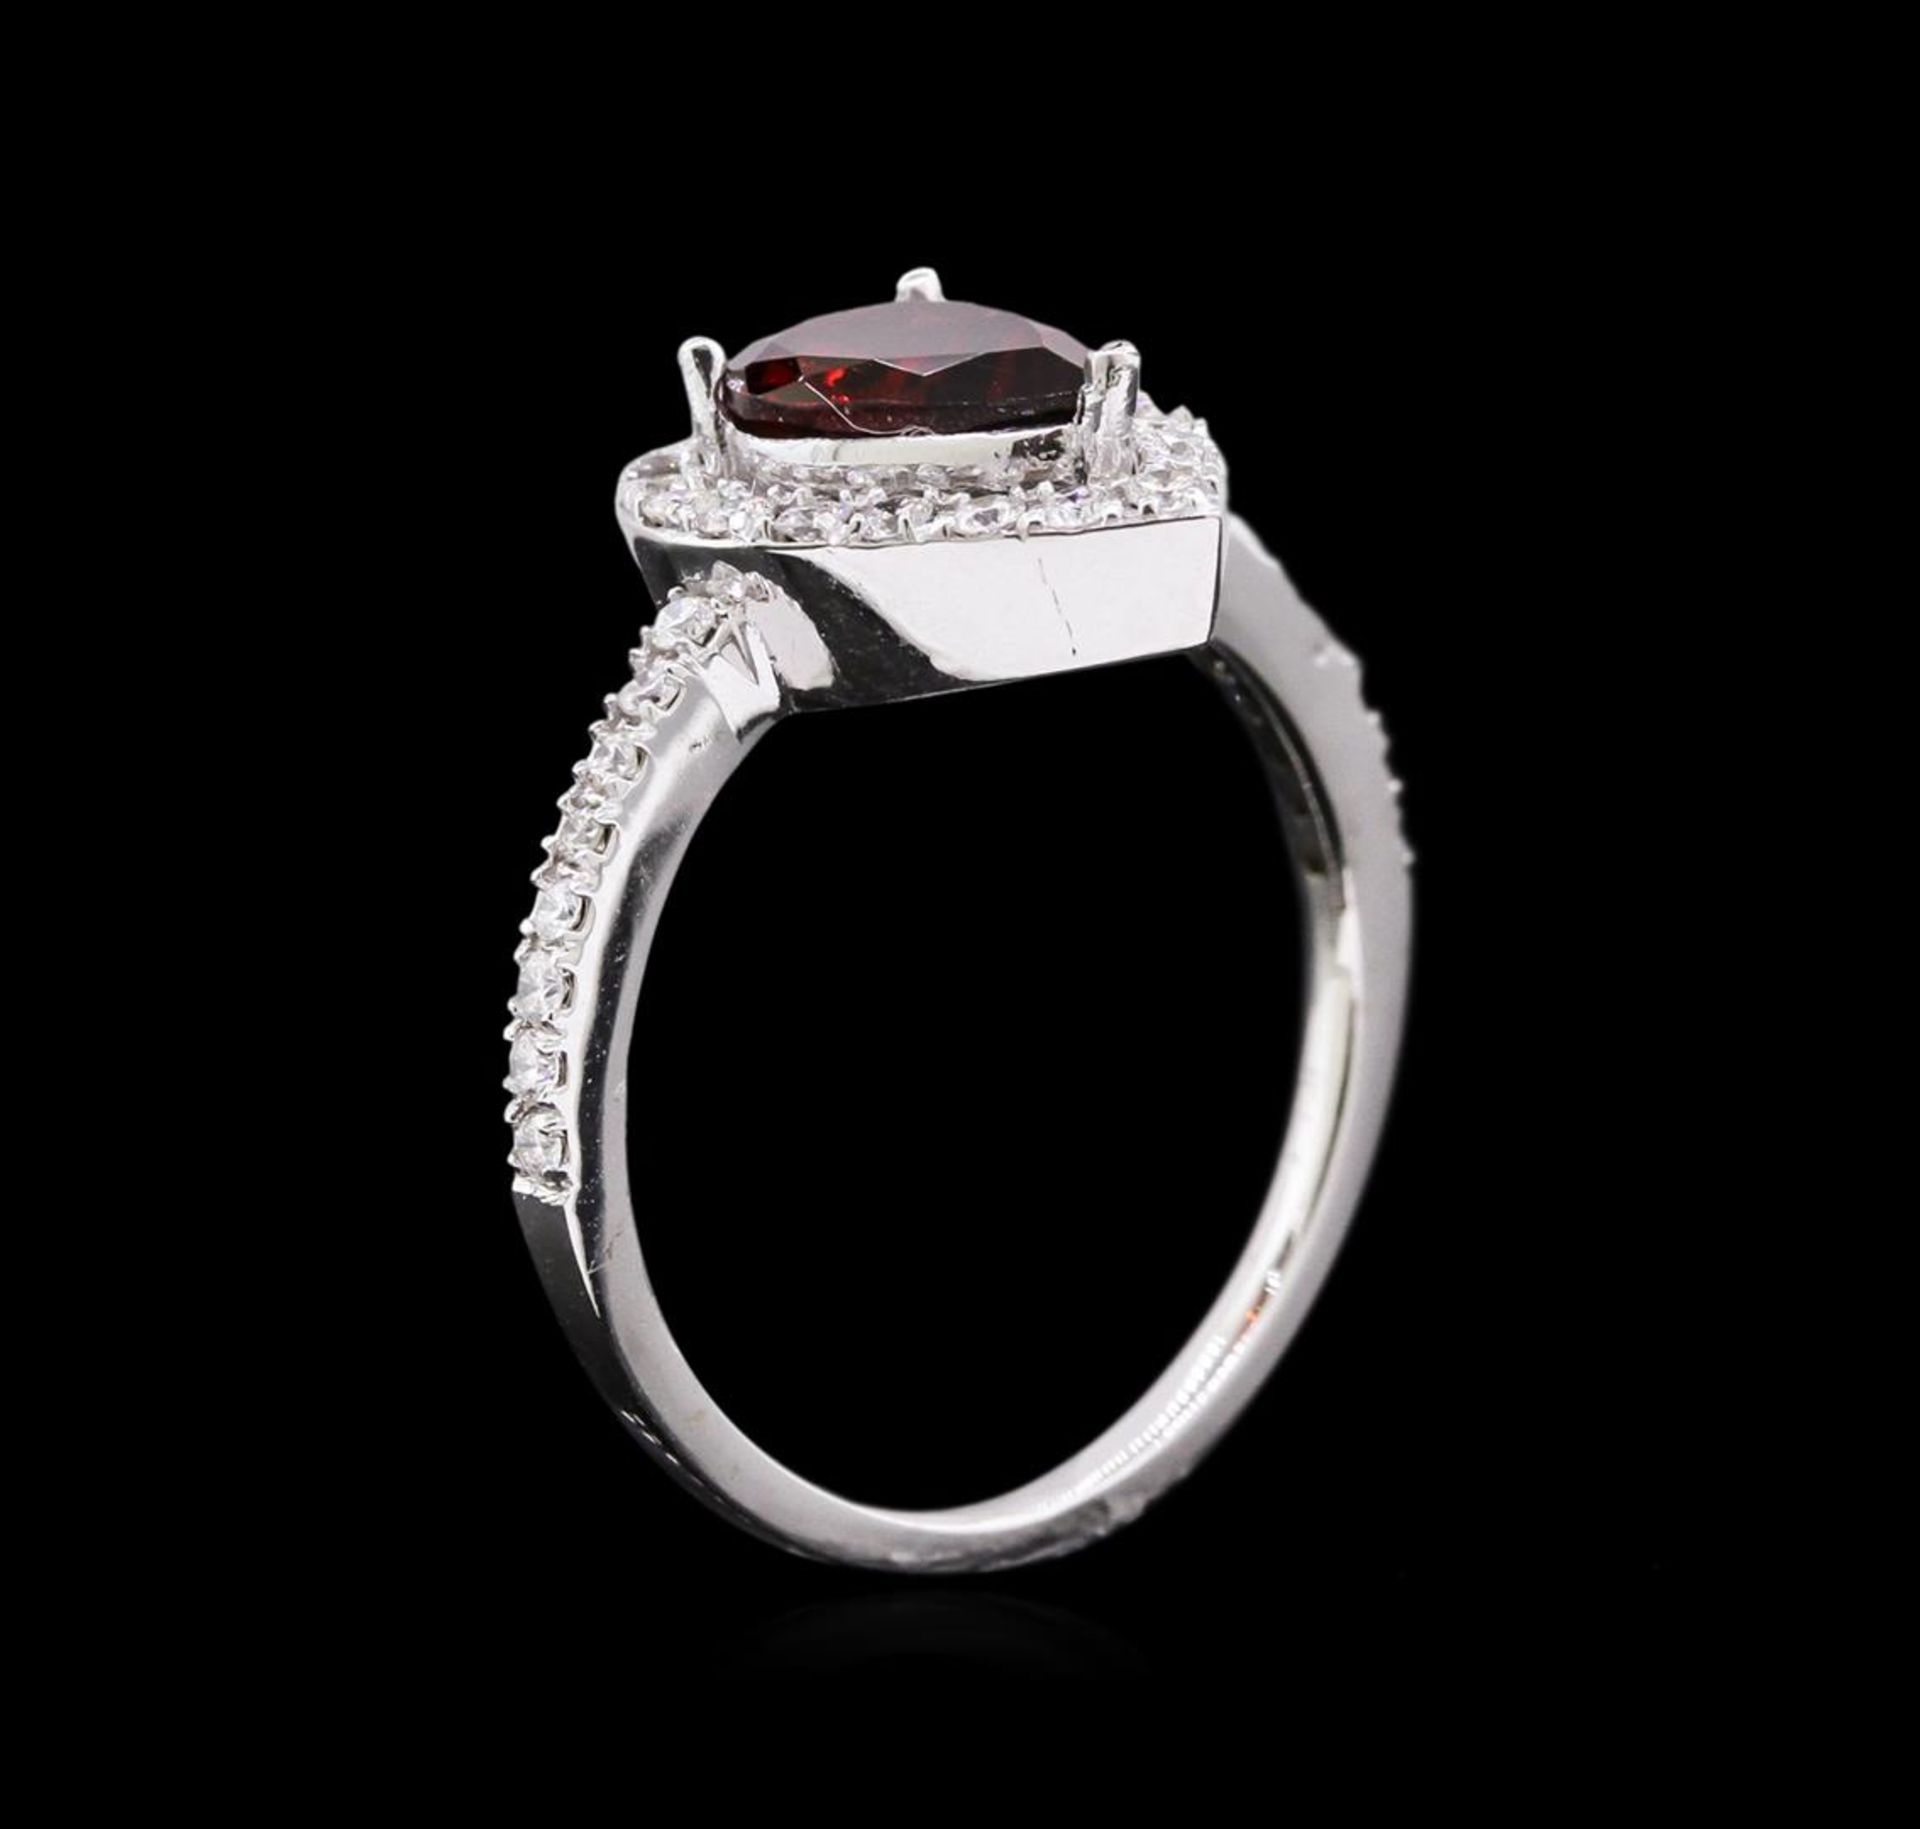 1.35 ctw Tourmaline and Diamond Ring - 14KT White Gold - Image 3 of 3